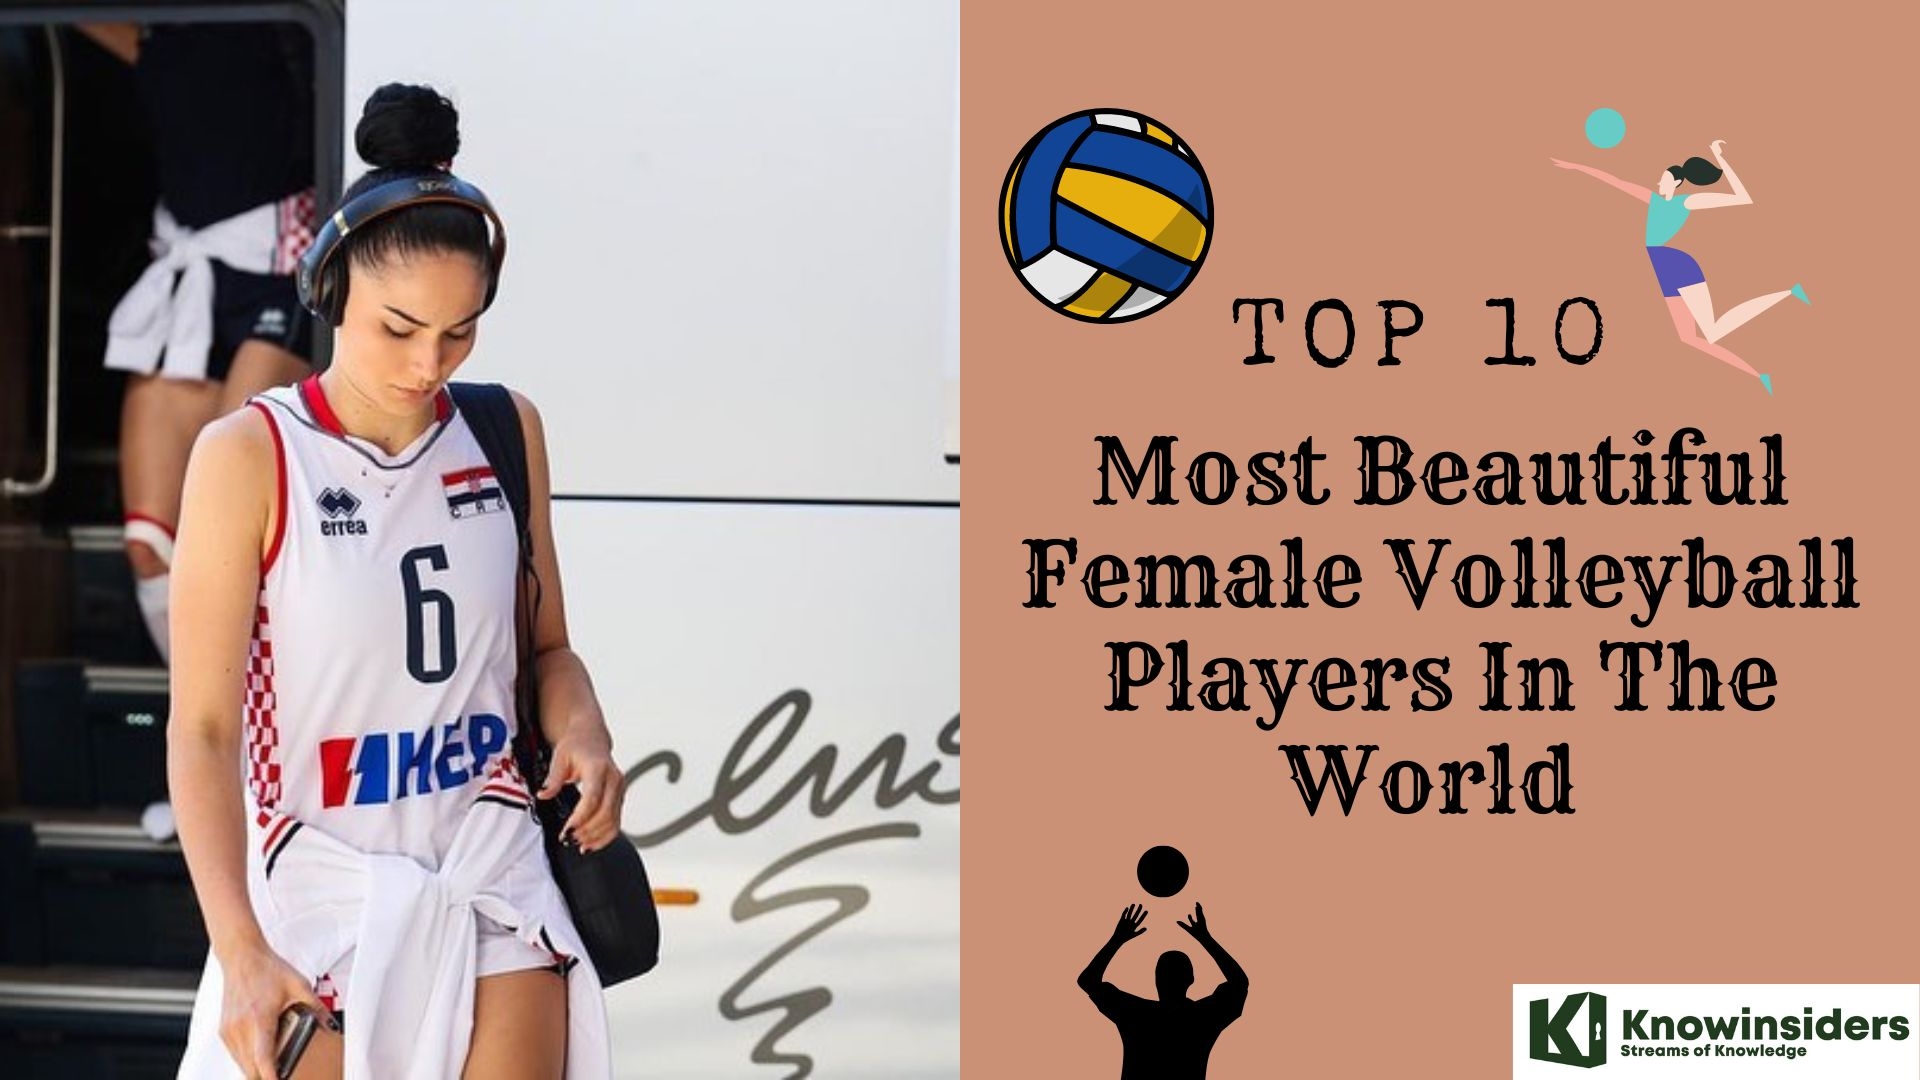 Top 10 Most Beautiful Female Volleyball Players In The World Knowinsiders.com 